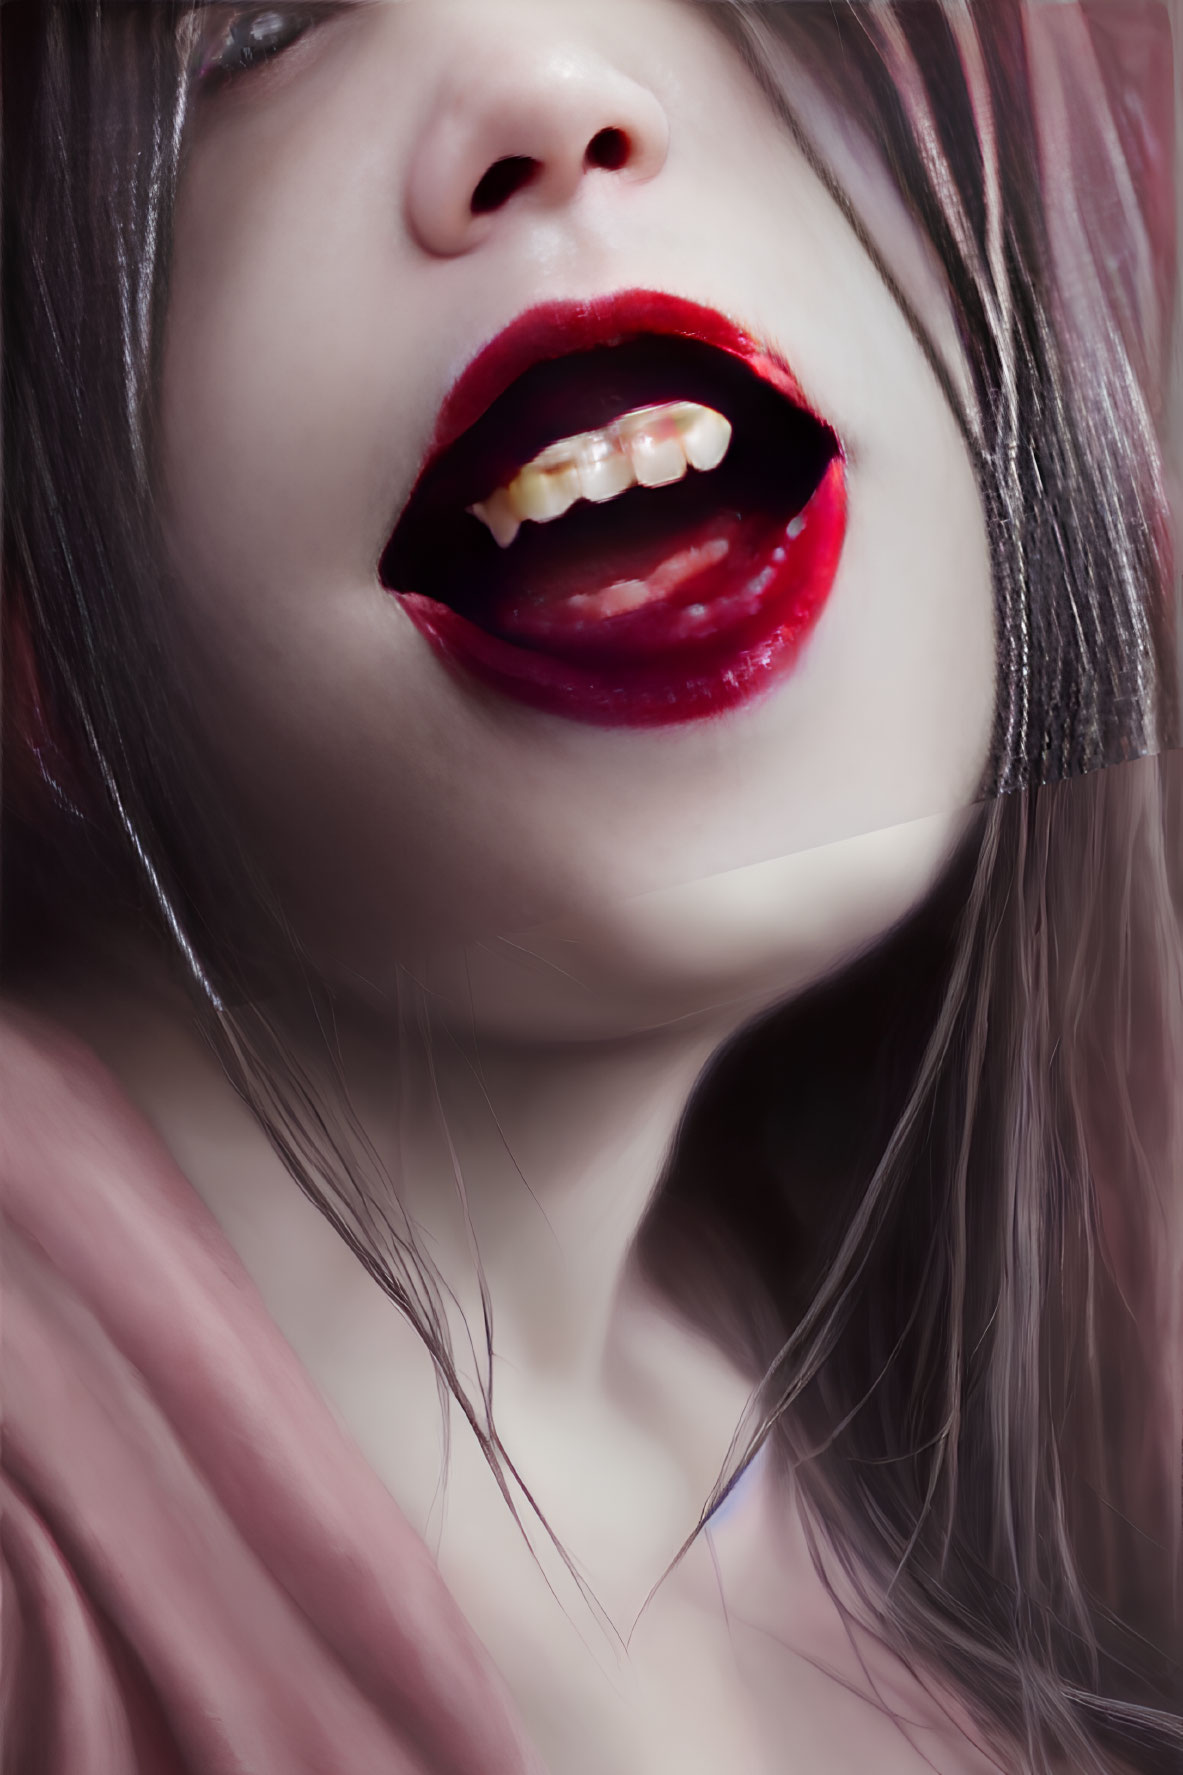 Close-up portrait of person with dark hair, red lips, and sharp canine tooth.